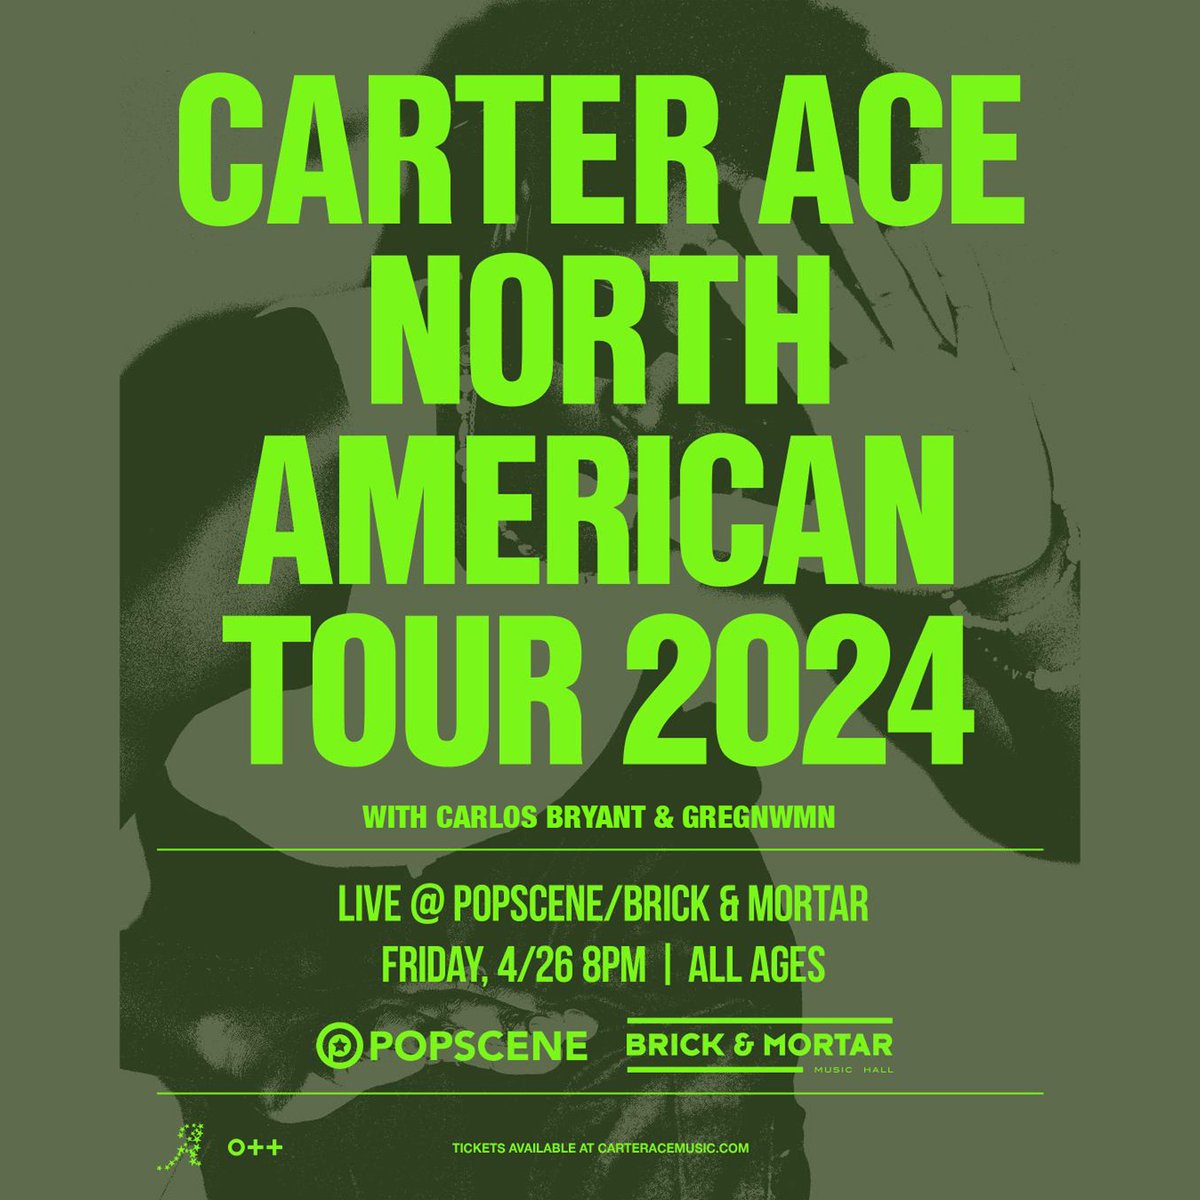 NEXT FRIDAY! @CarterAceMusic is live in SF with @CarlosBryant209 and @gregnwmn. Powered by @popsceneSF. TICKETS: bit.ly/3W5BhOG